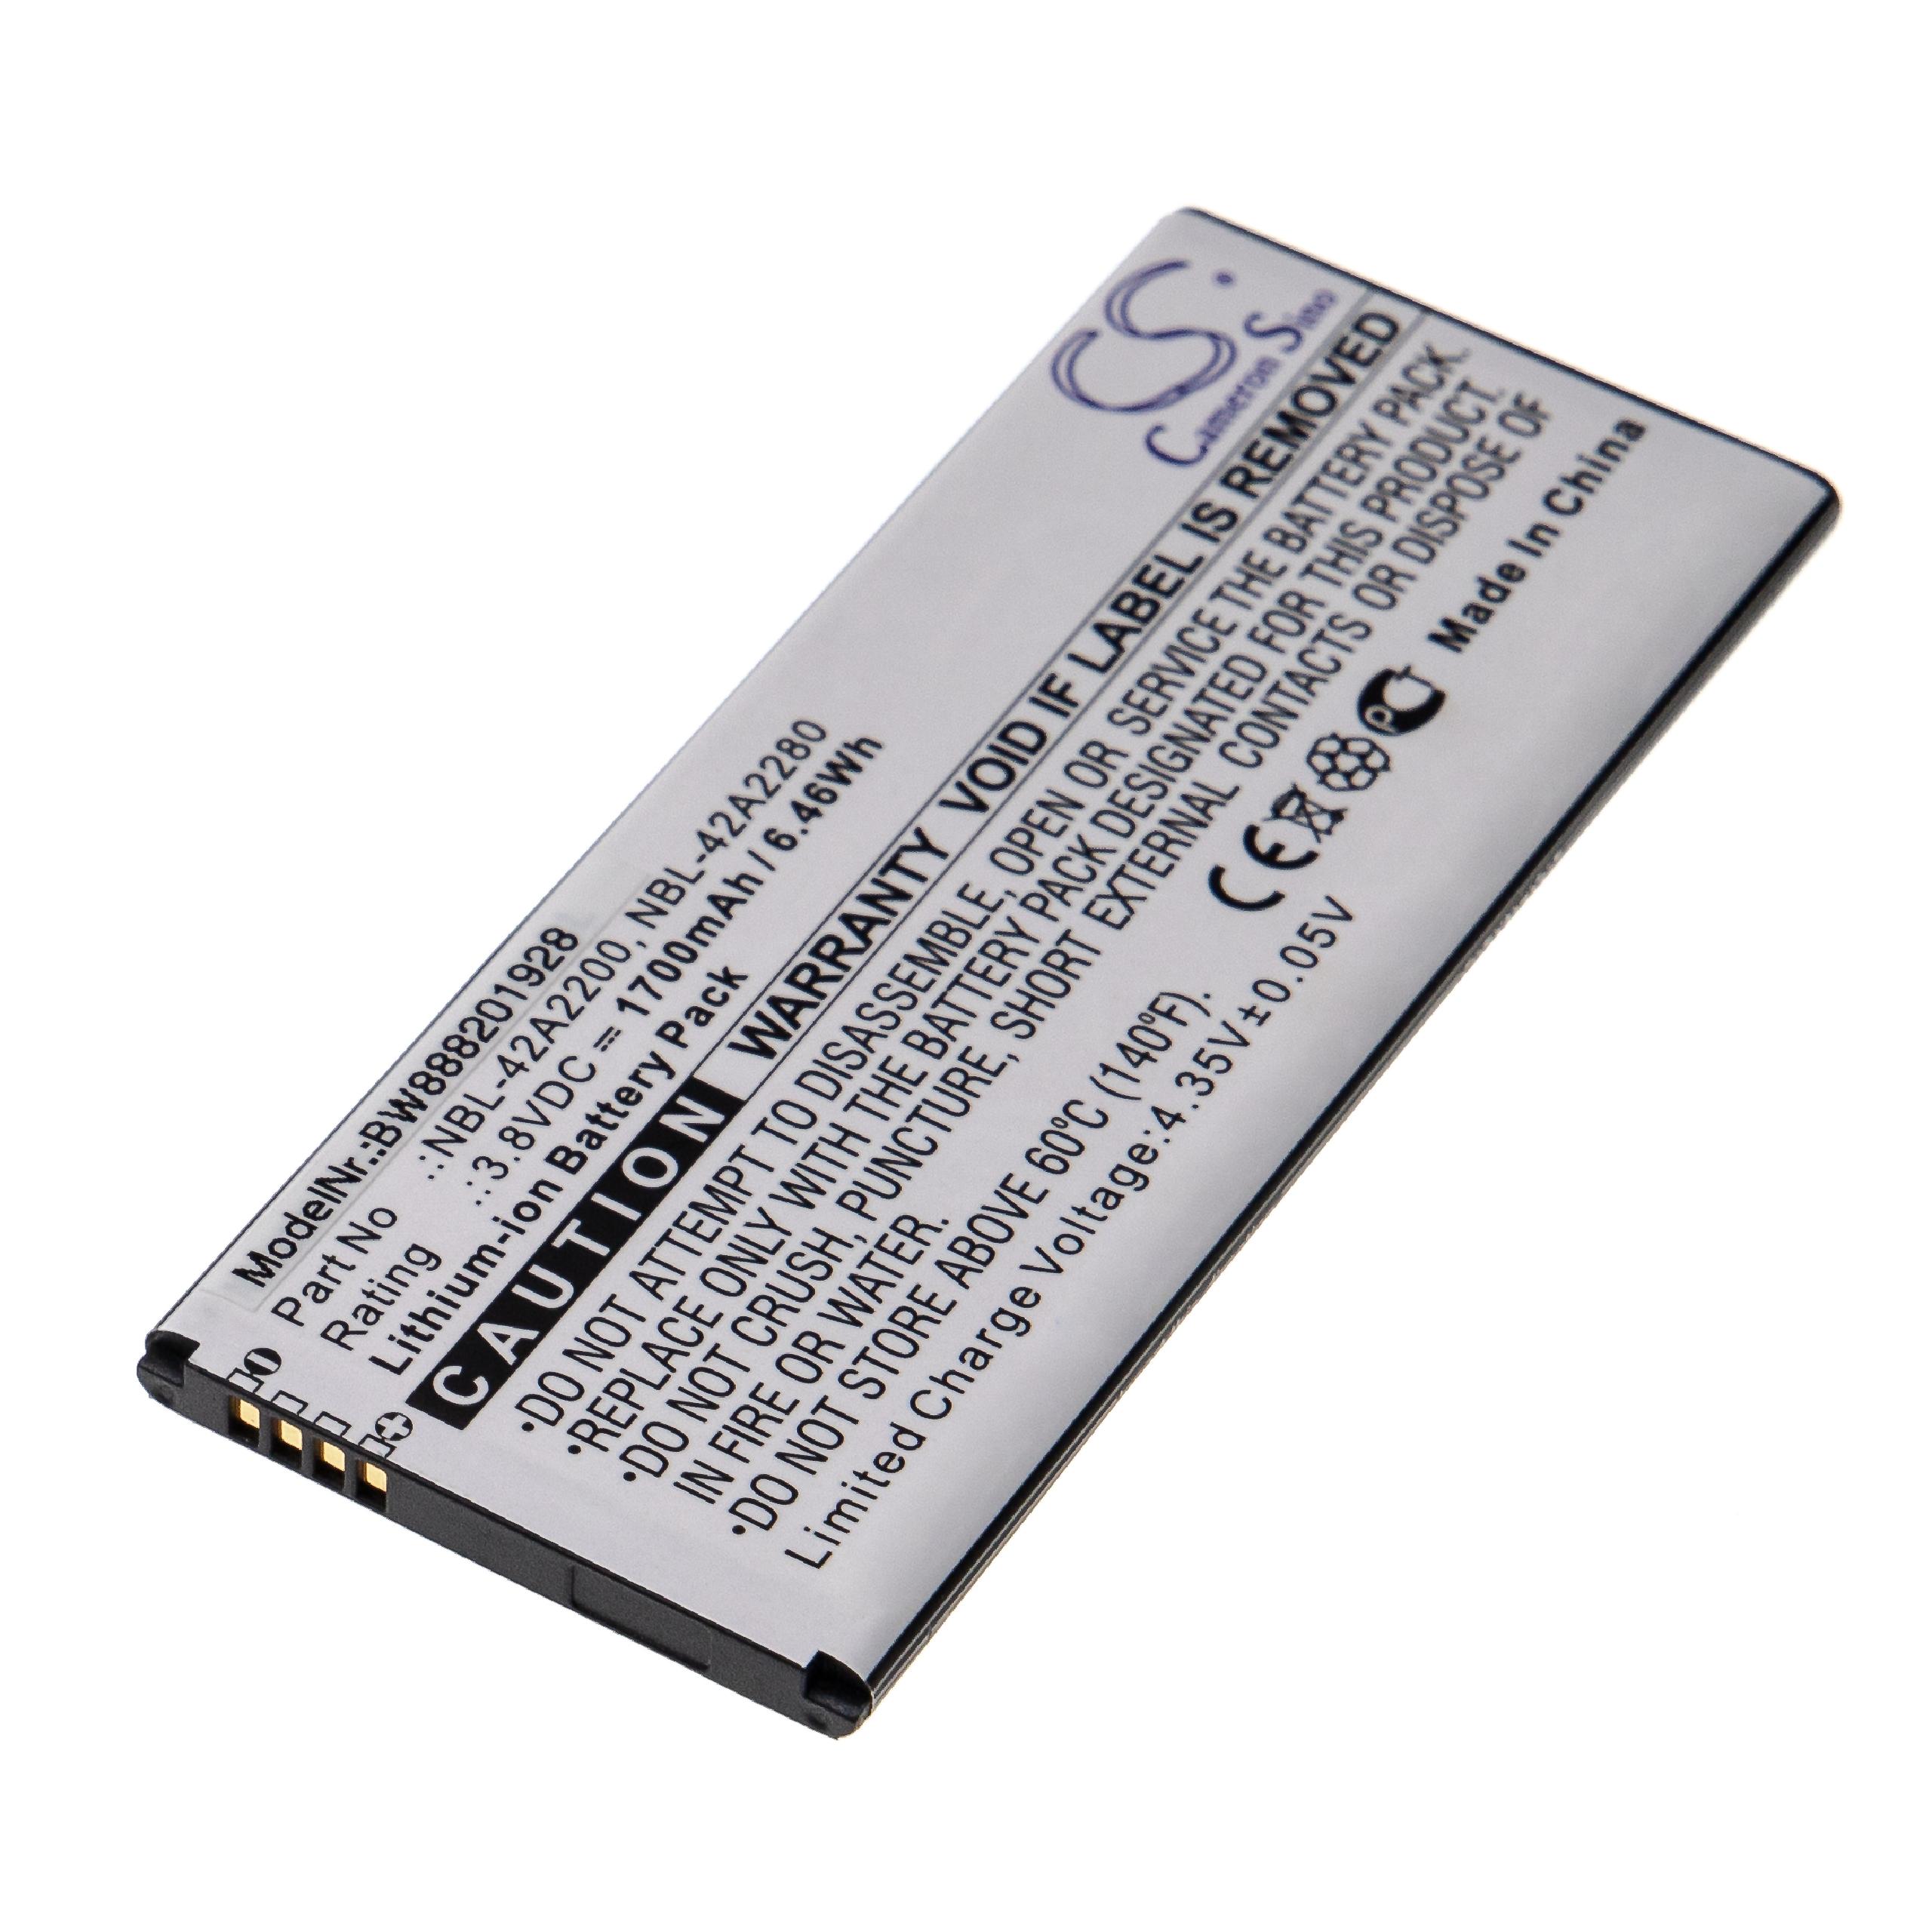 Mobile Phone Battery Replacement for TP-Link/ Neffos NBL-42A2280, NBL-42A2200 - 1700mAh 3.8V Li-Ion